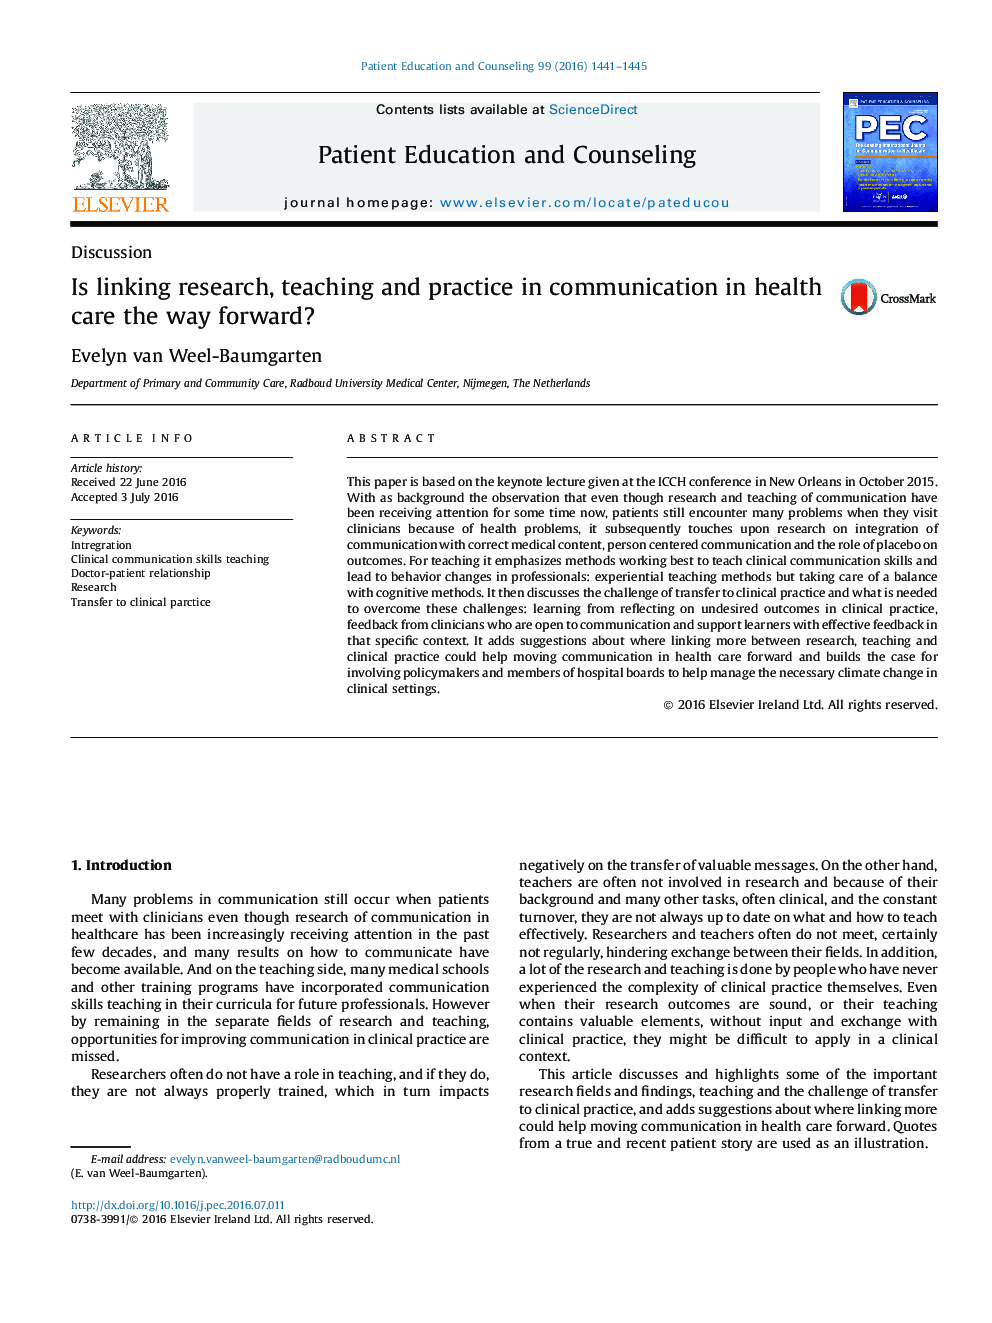 Is linking research, teaching and practice in communication in health care the way forward?